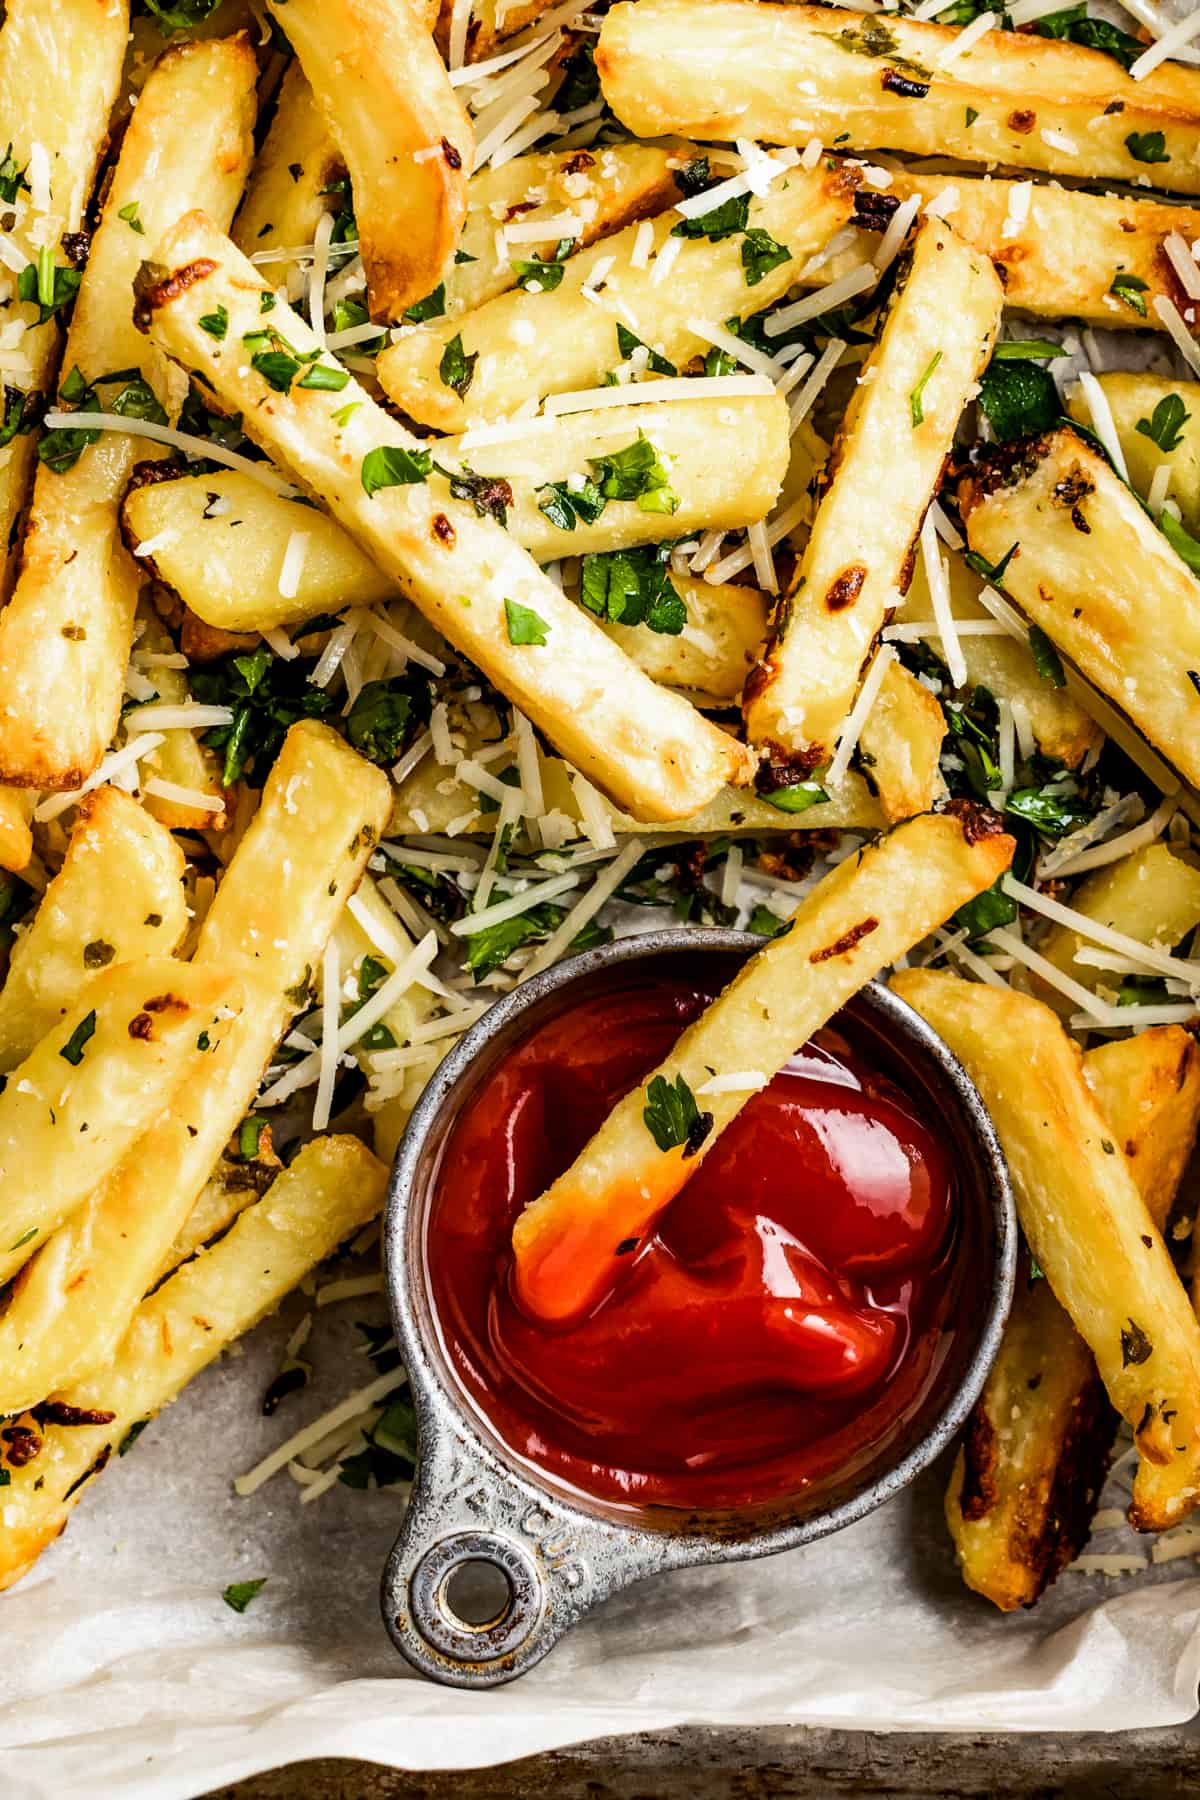 Parmesan truffle fries are arranged on a white background. One fry is dipped in a small bowl of ketchup.